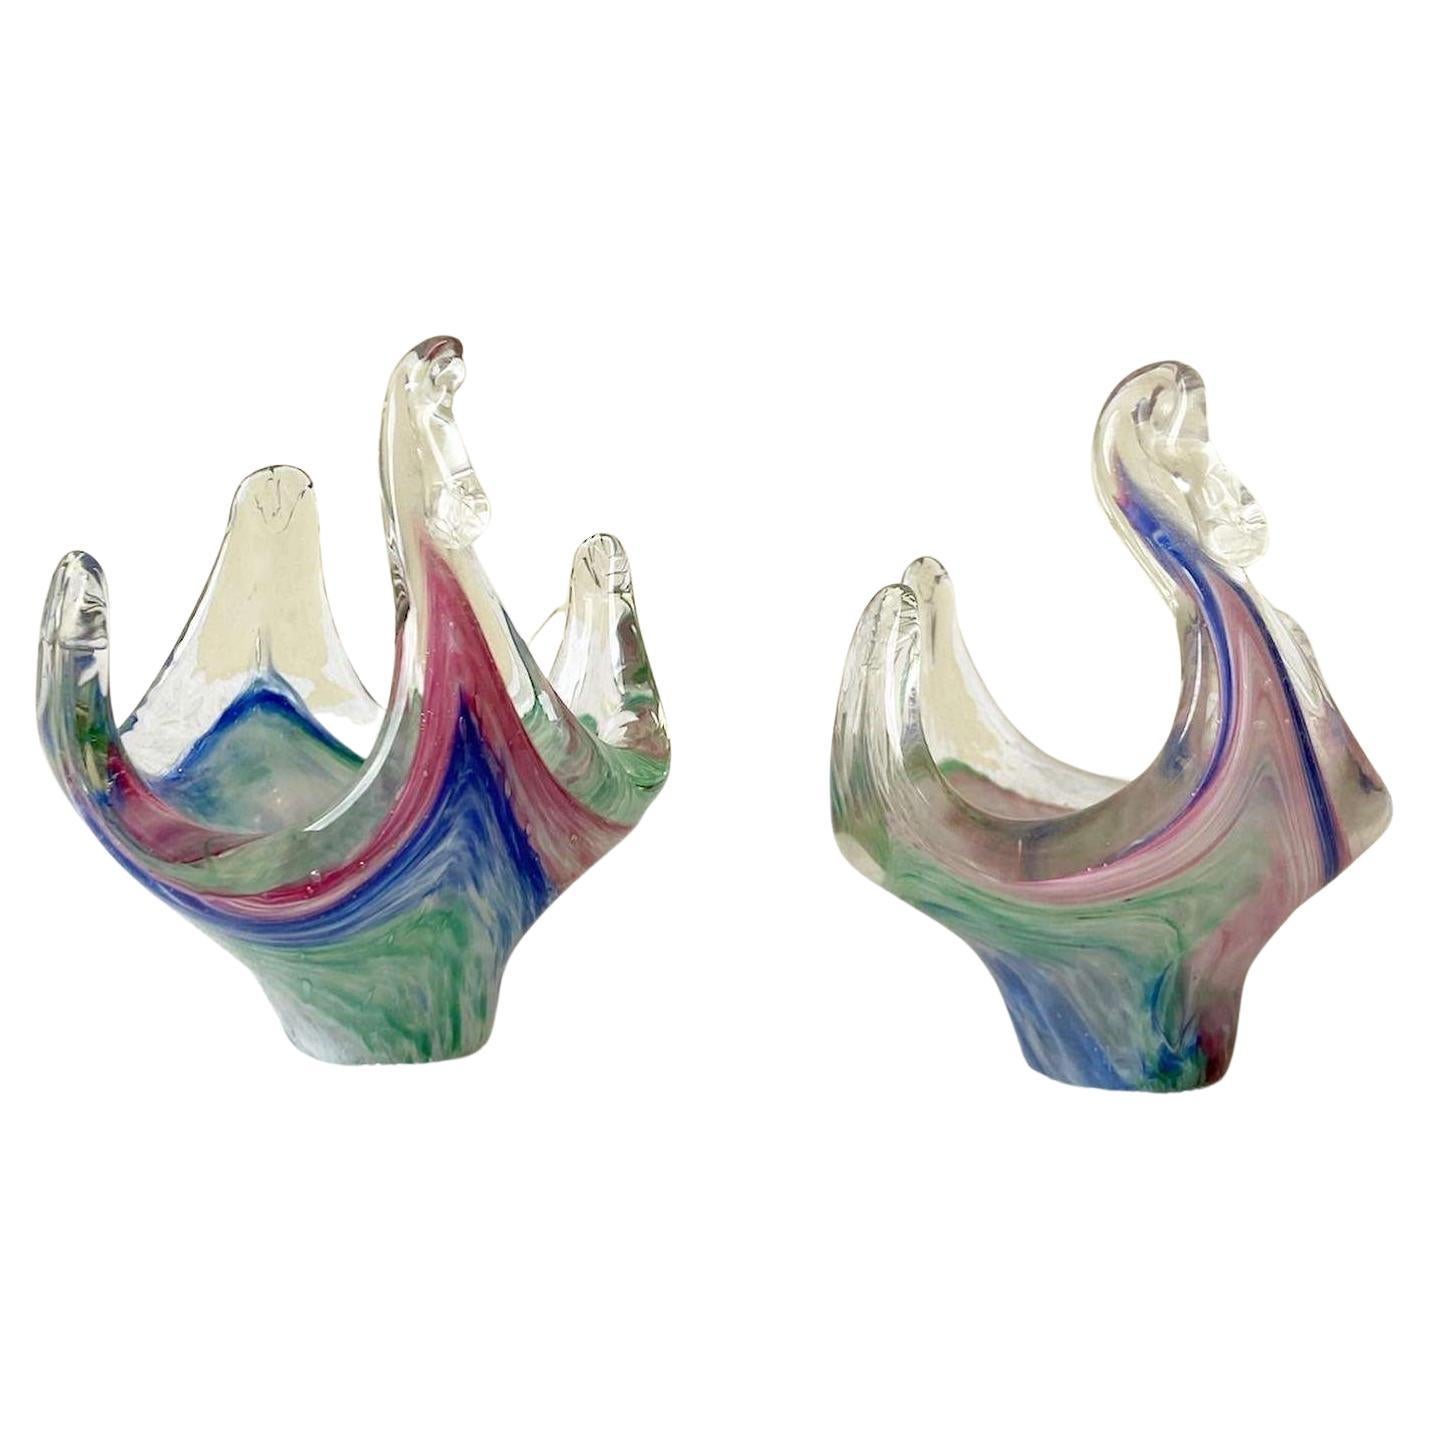 Postmodern Glass Swan Decorative Candy Dishes - a Pair For Sale